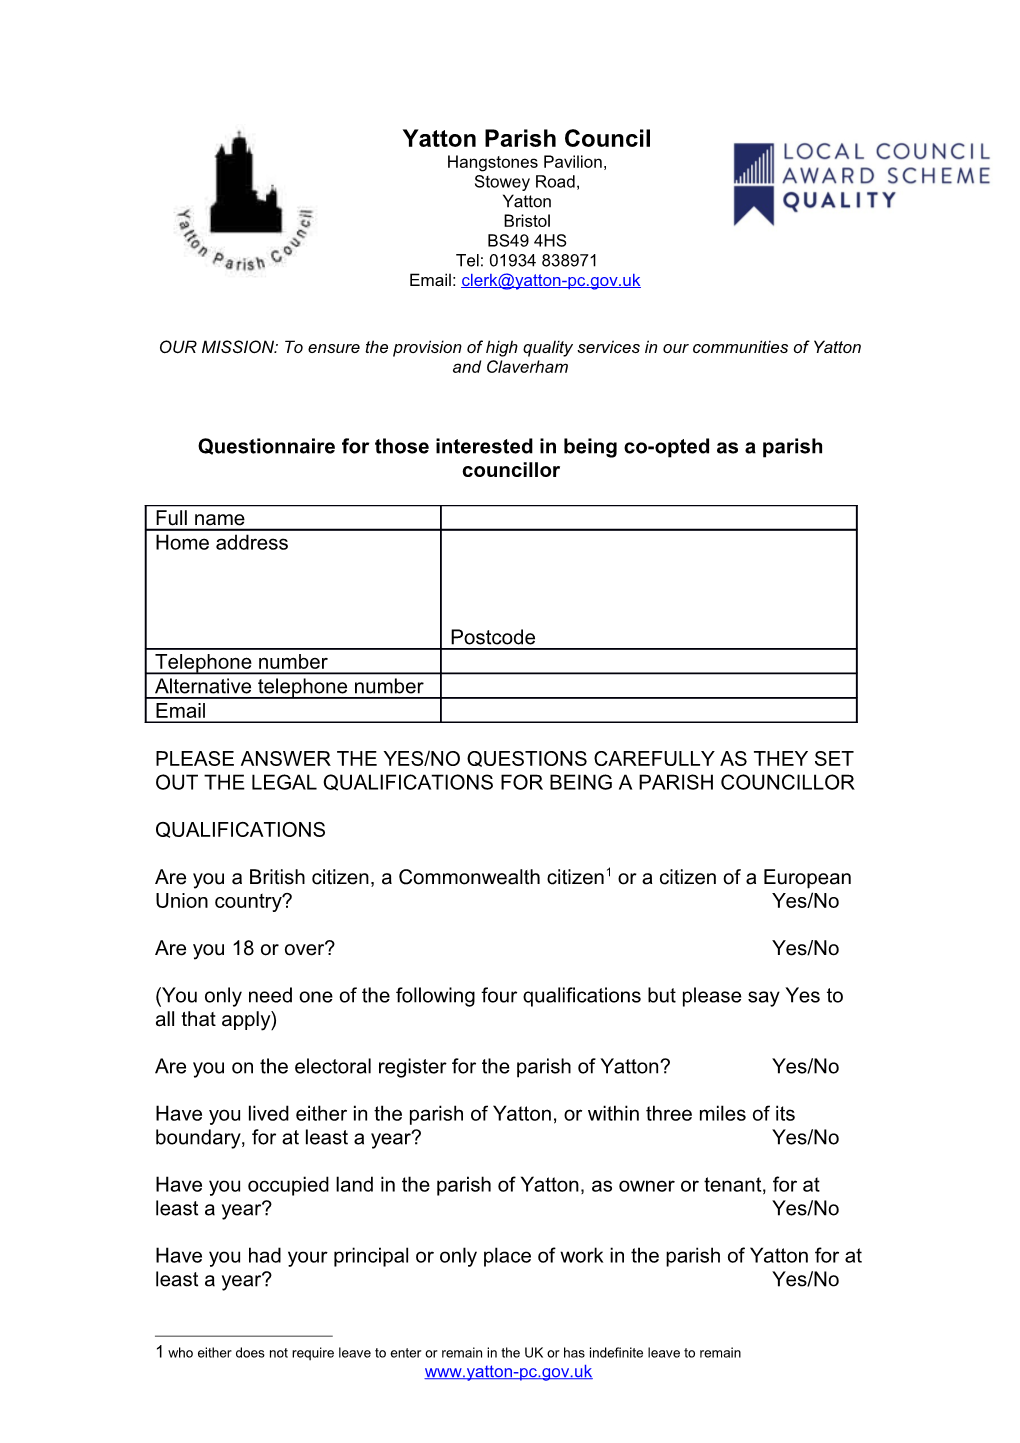 Questionnaire for Those Interested in Being Co-Opted As a Parish Councillor